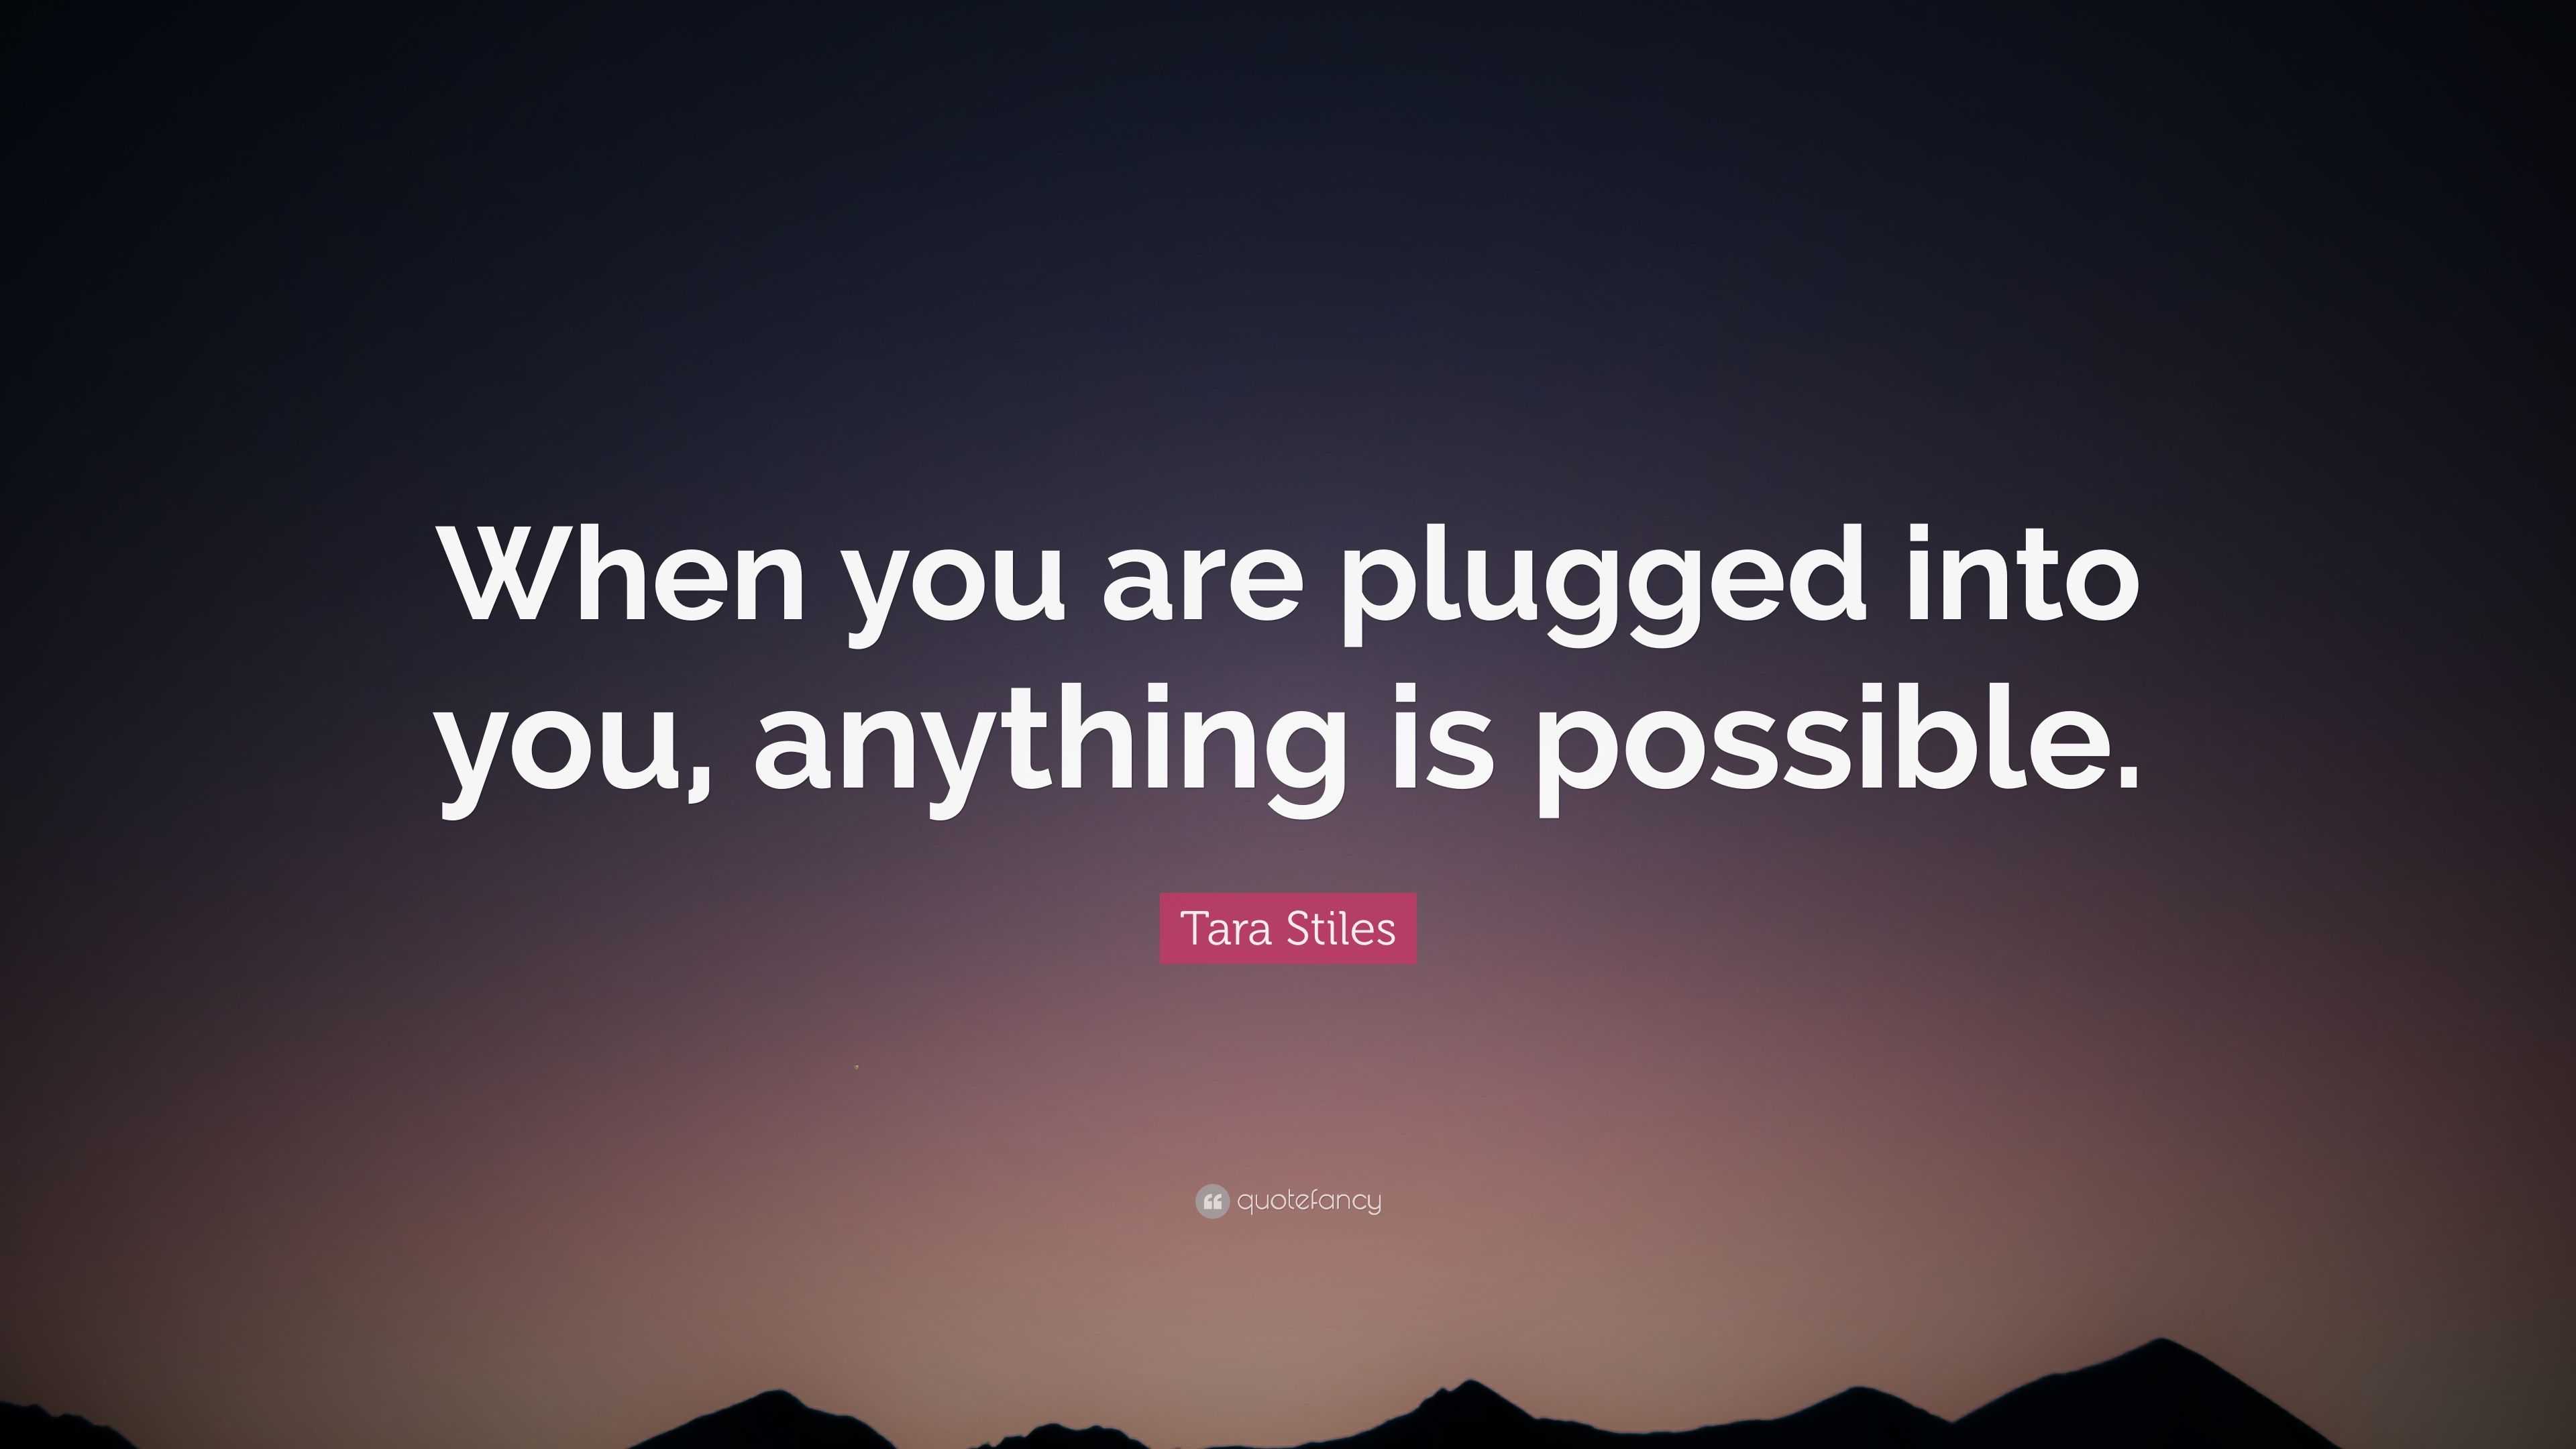 Tara Stiles Quote “when You Are Plugged Into You Anything Is Possible”